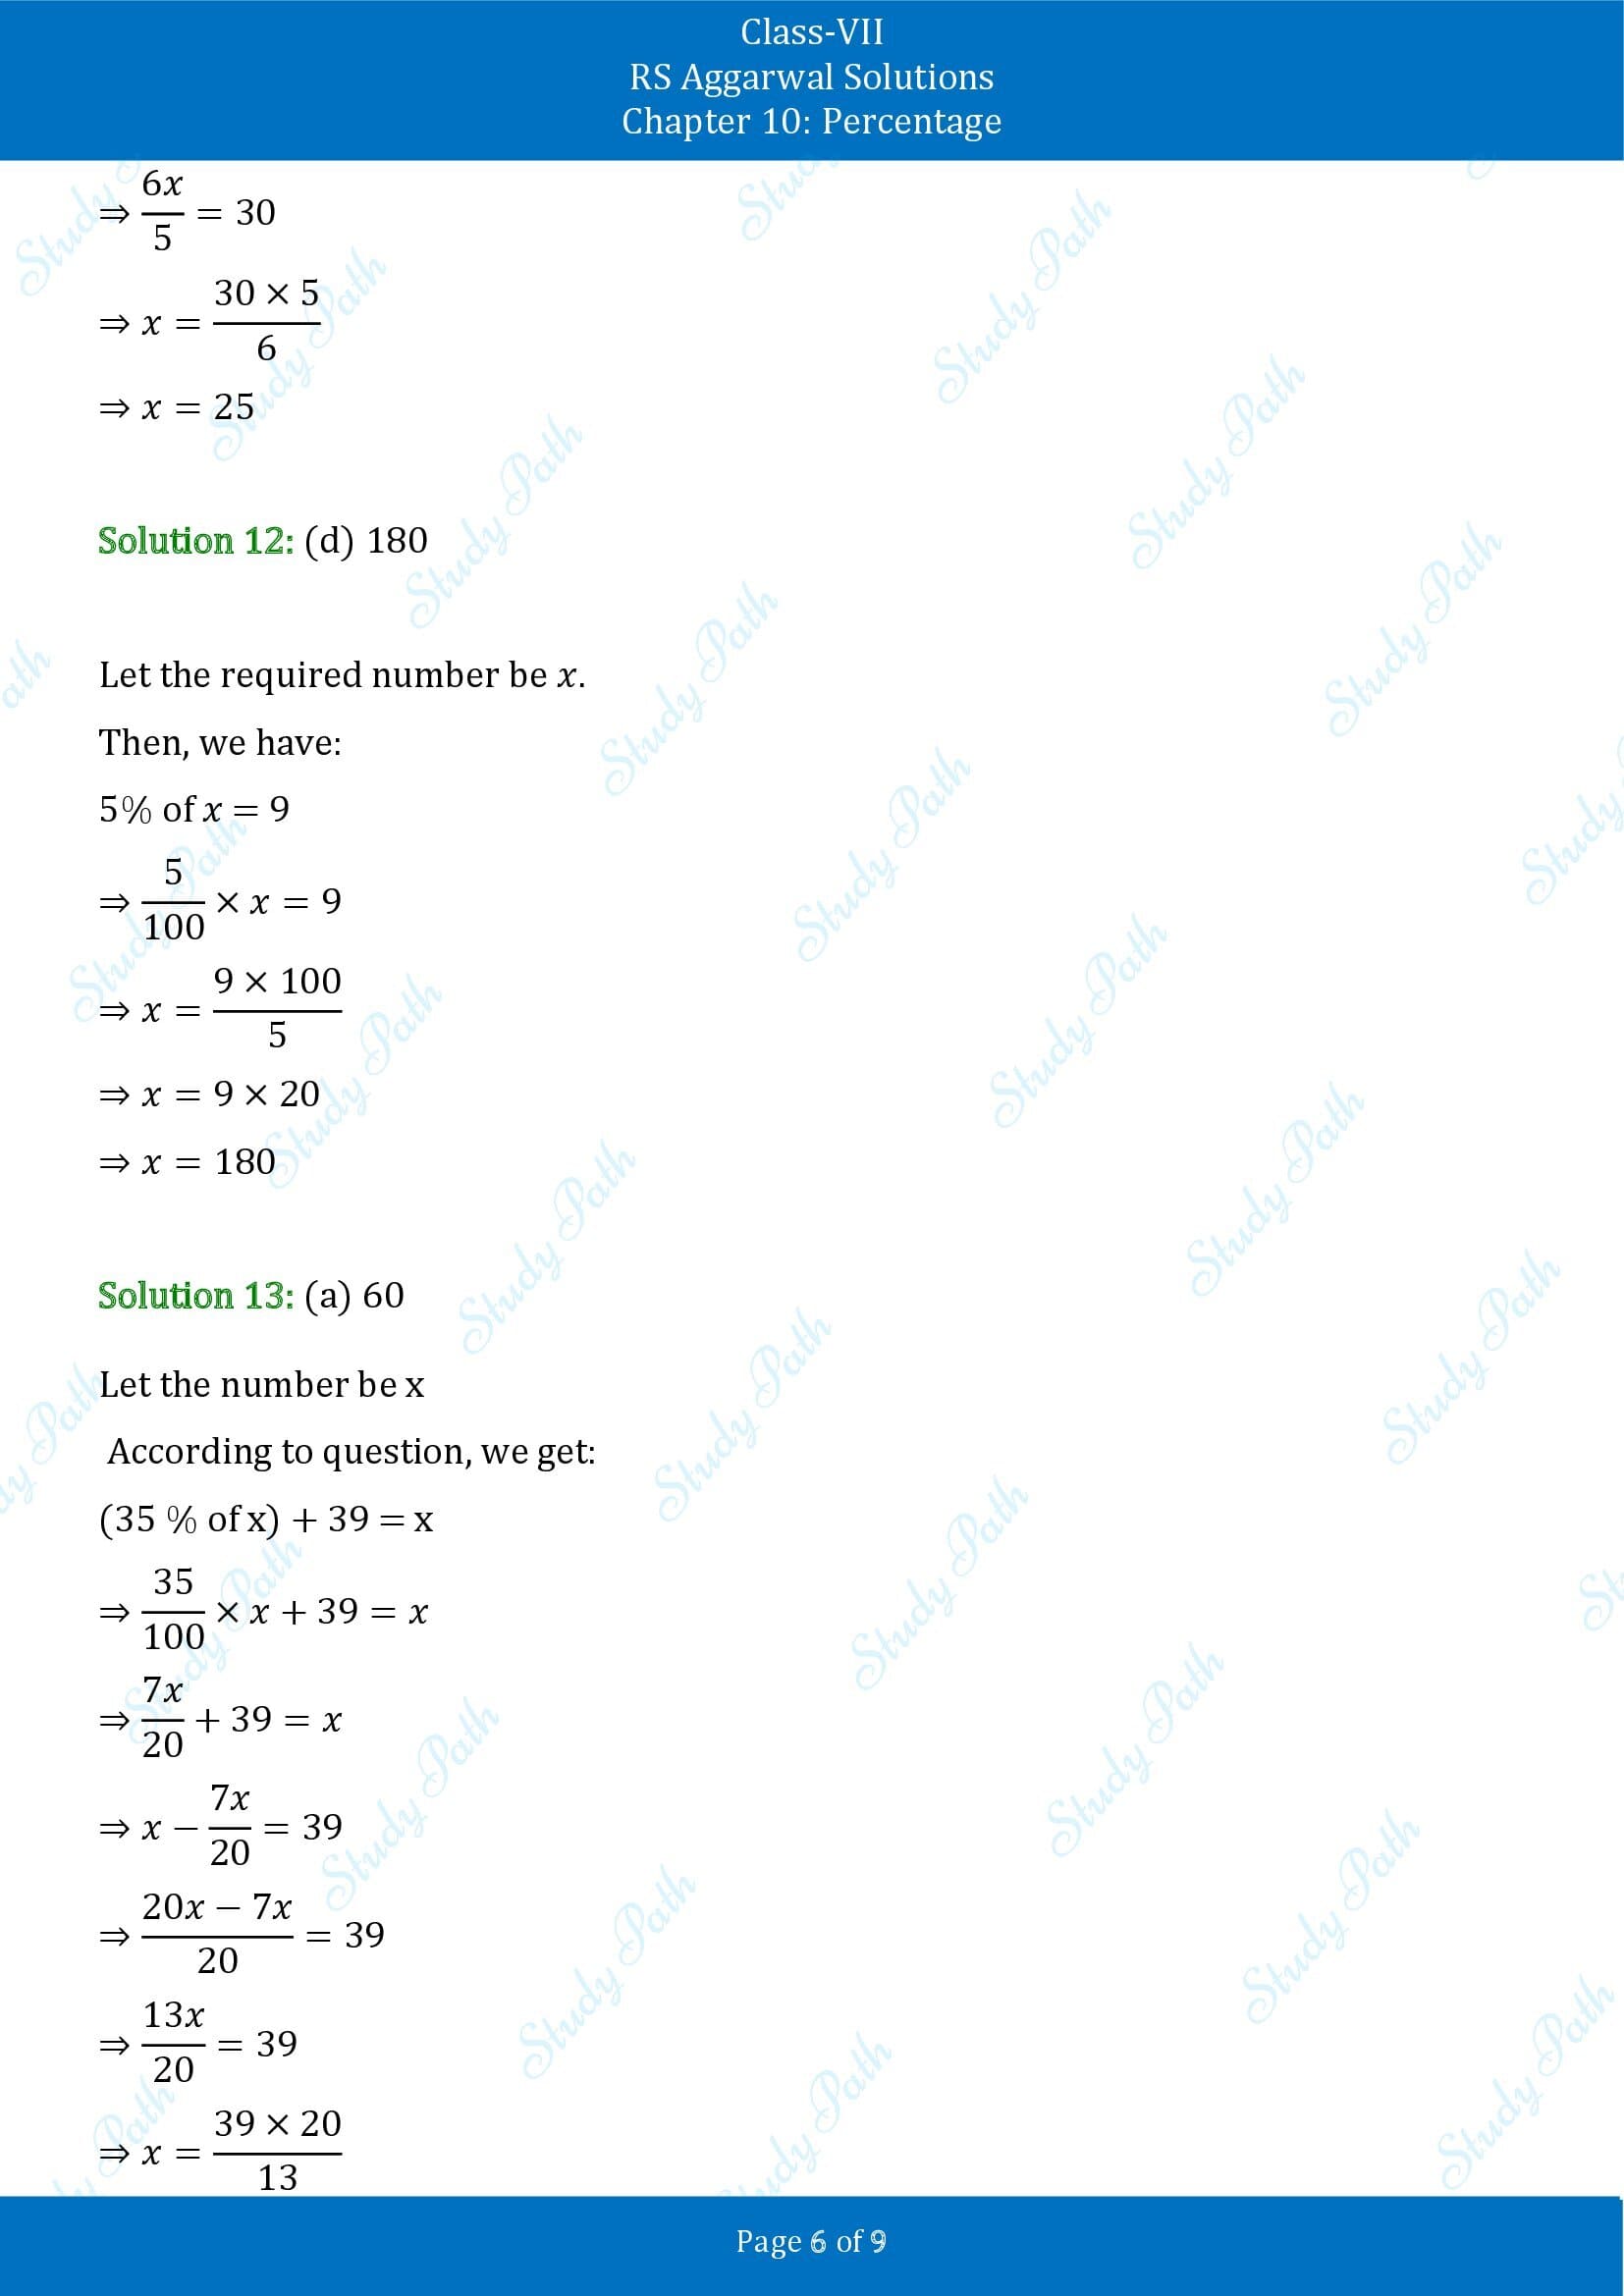 RS Aggarwal Solutions Class 7 Chapter 10 Percentage Test Paper 00006